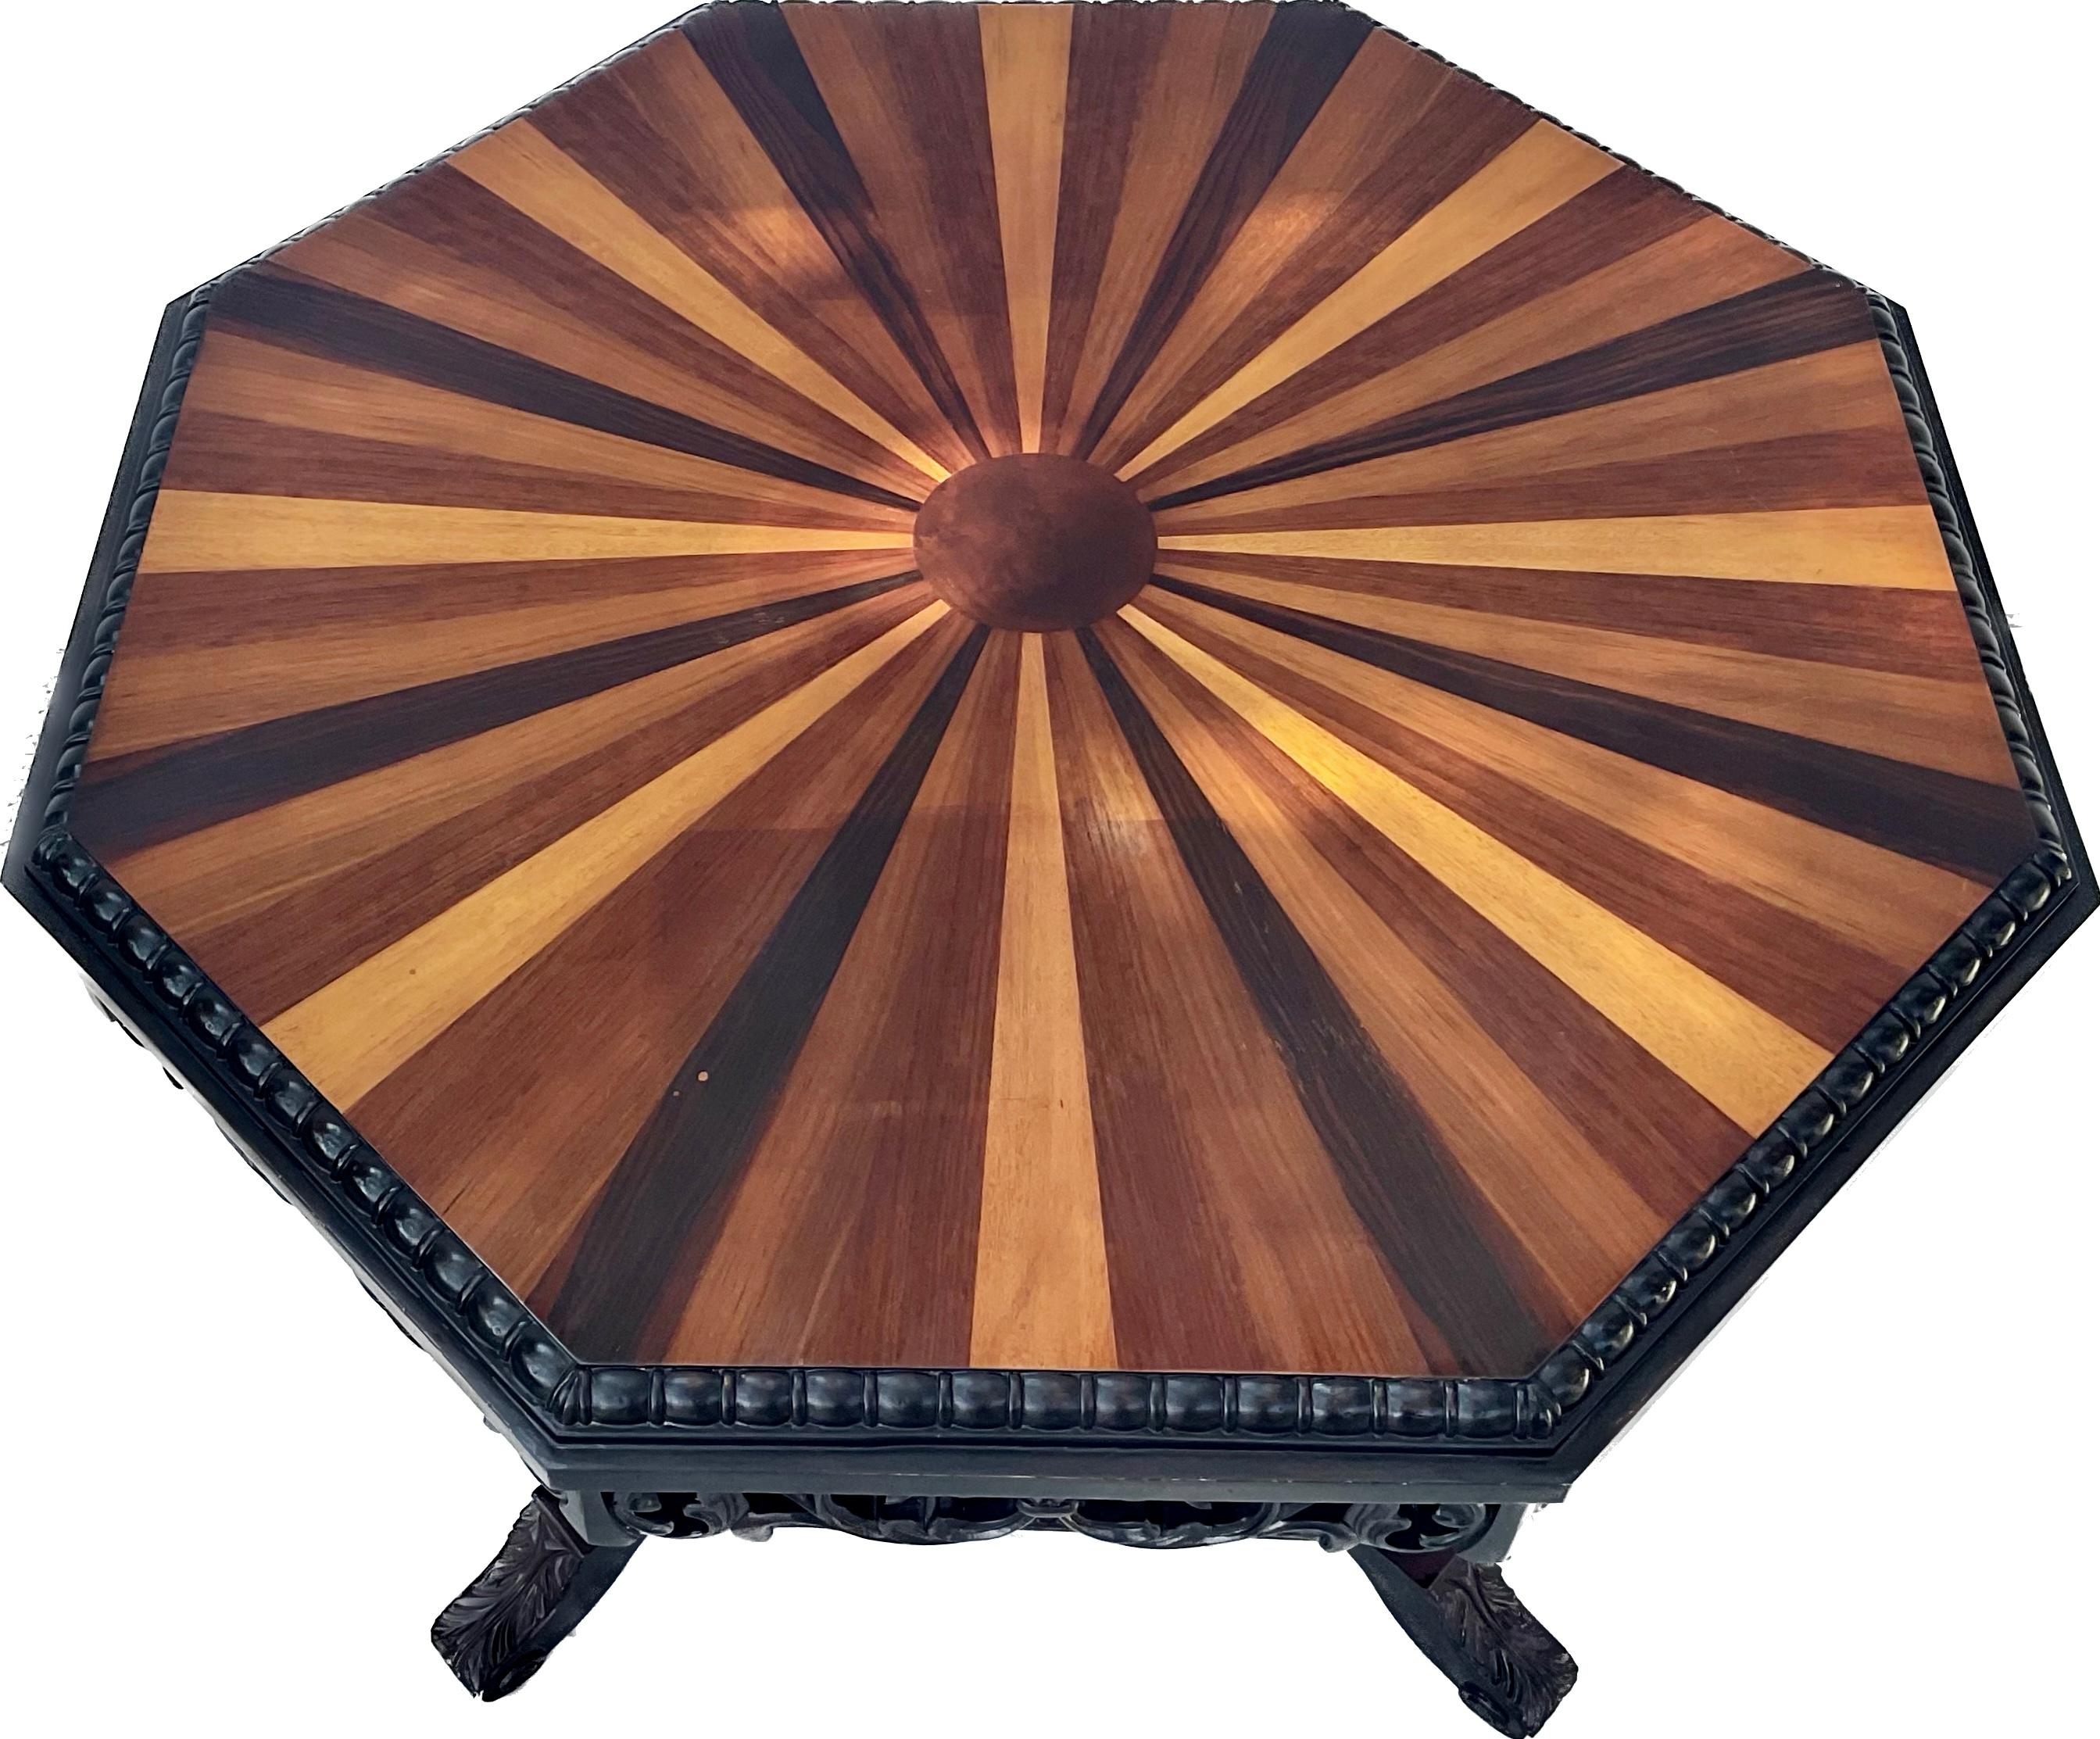 Ebony Anglo Indian Specimen Wooden Table